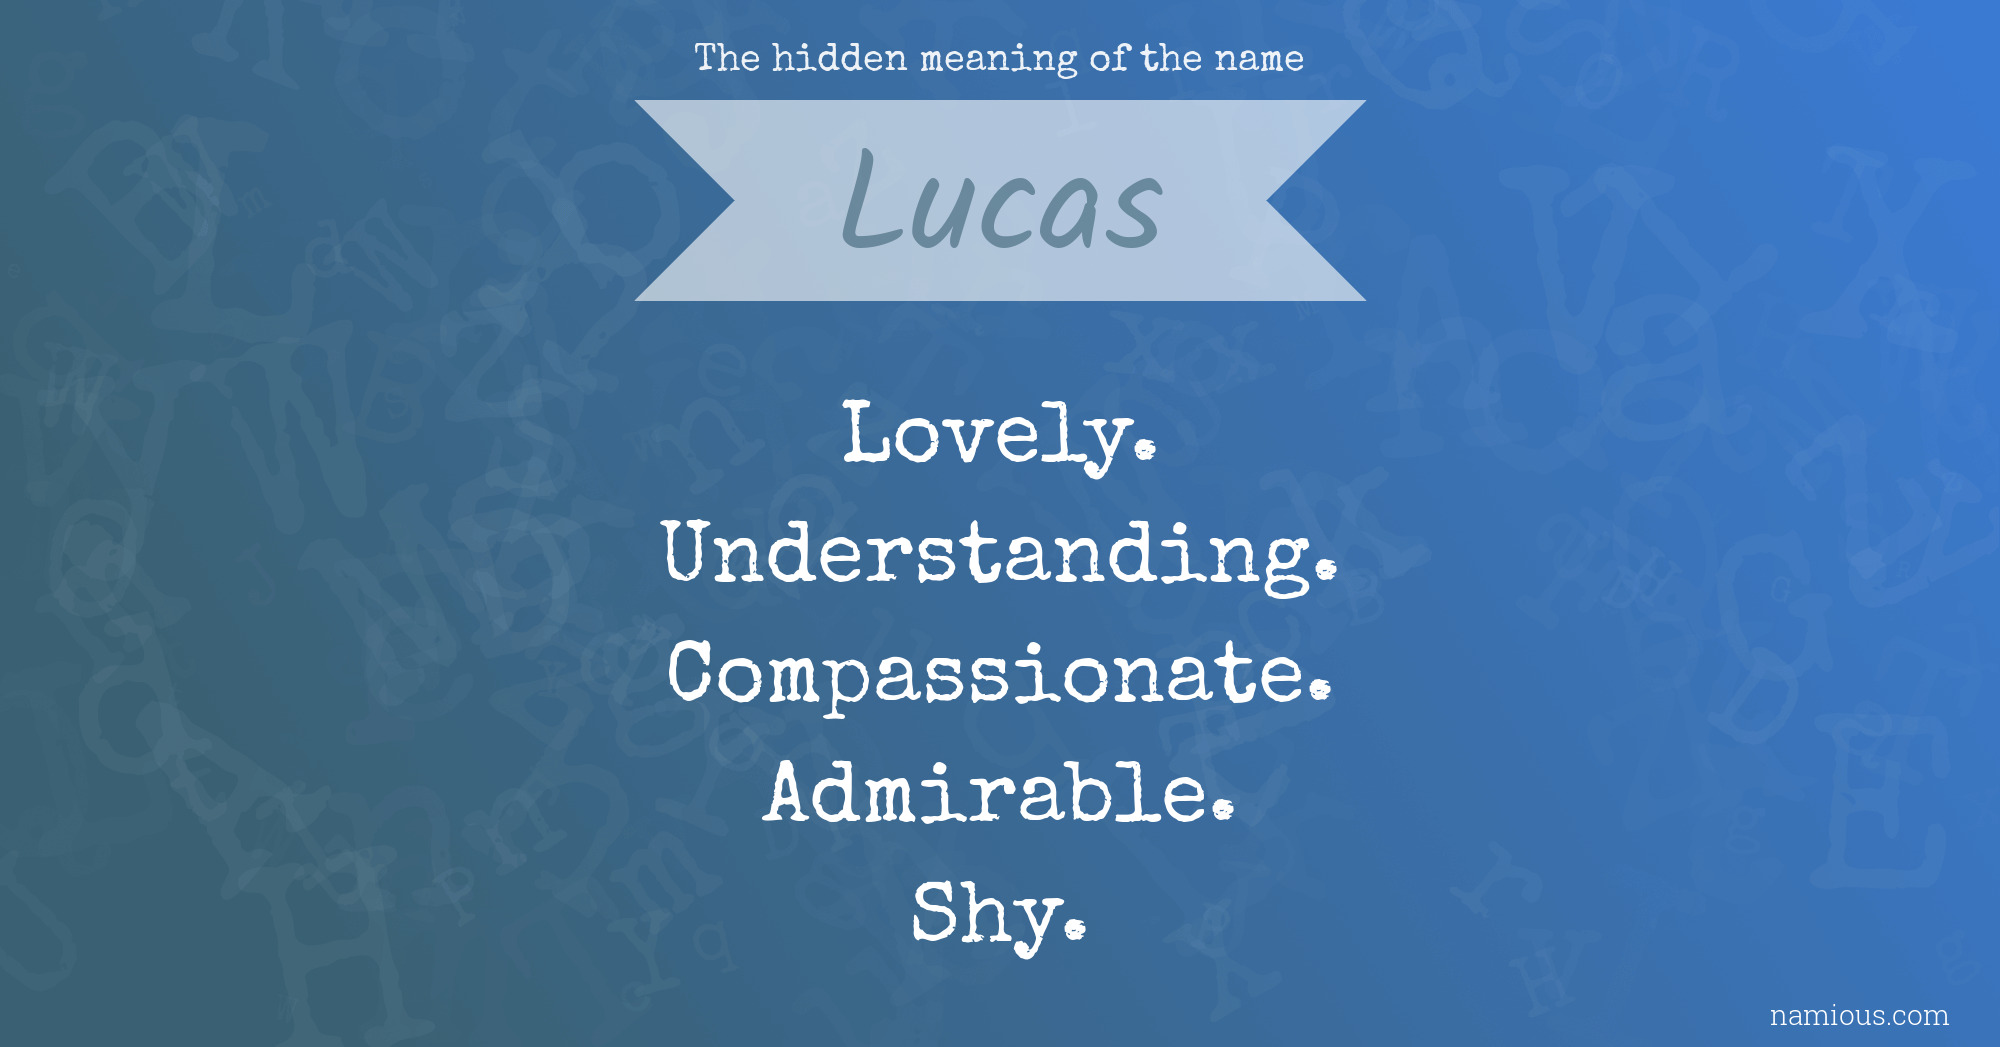 the-hidden-meaning-of-the-name-lucas-namious